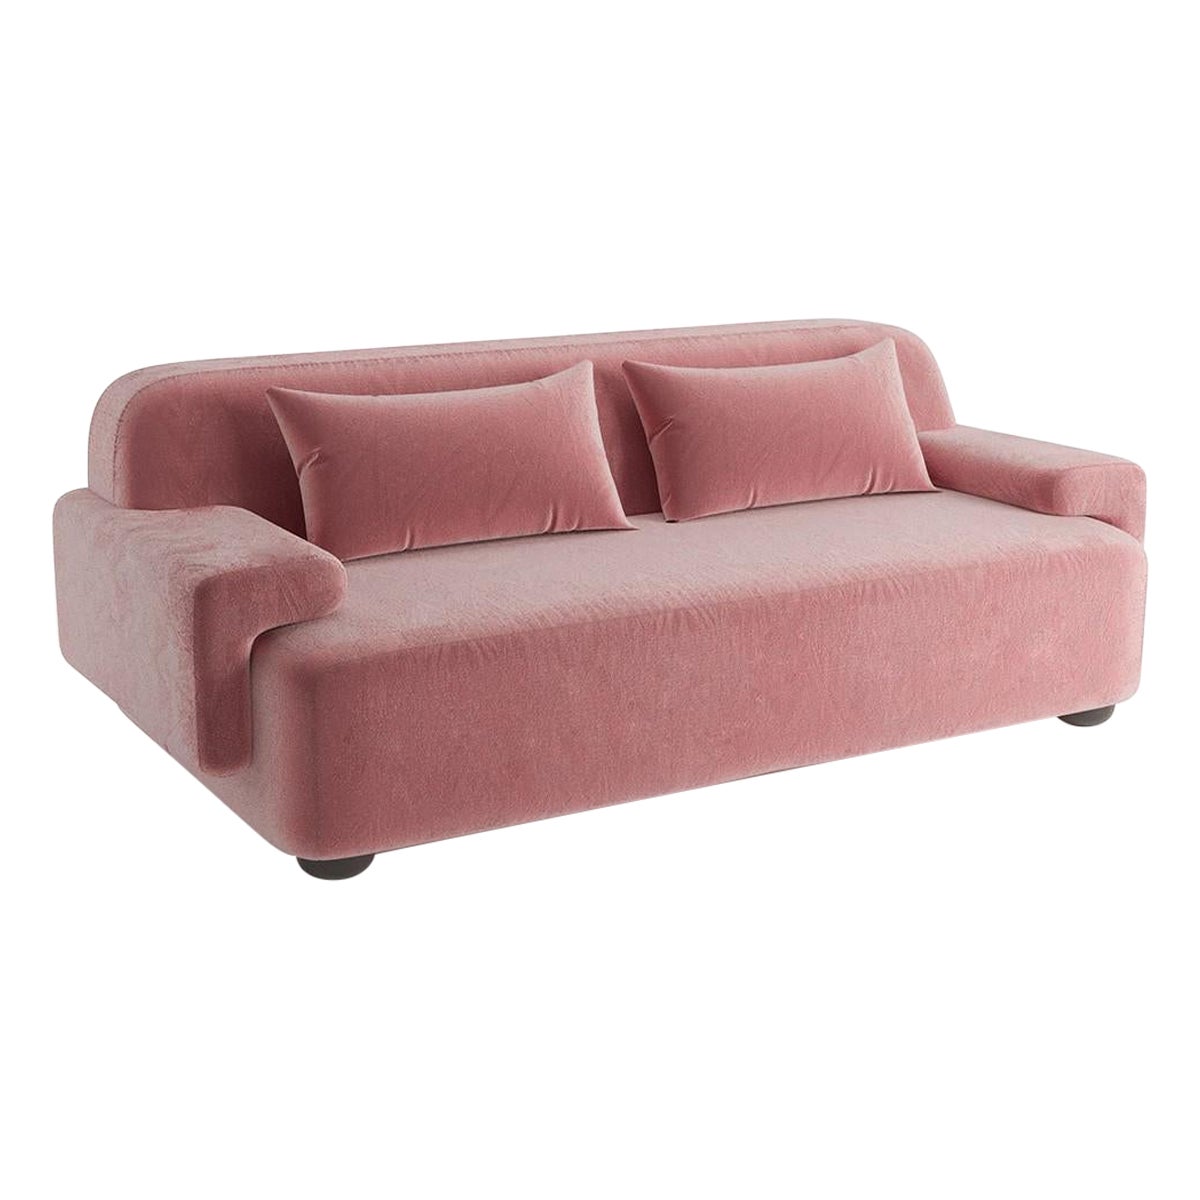 Popus Editions Lena 2.5 Seater Sofa in Pink Verone Velvet Upholstery